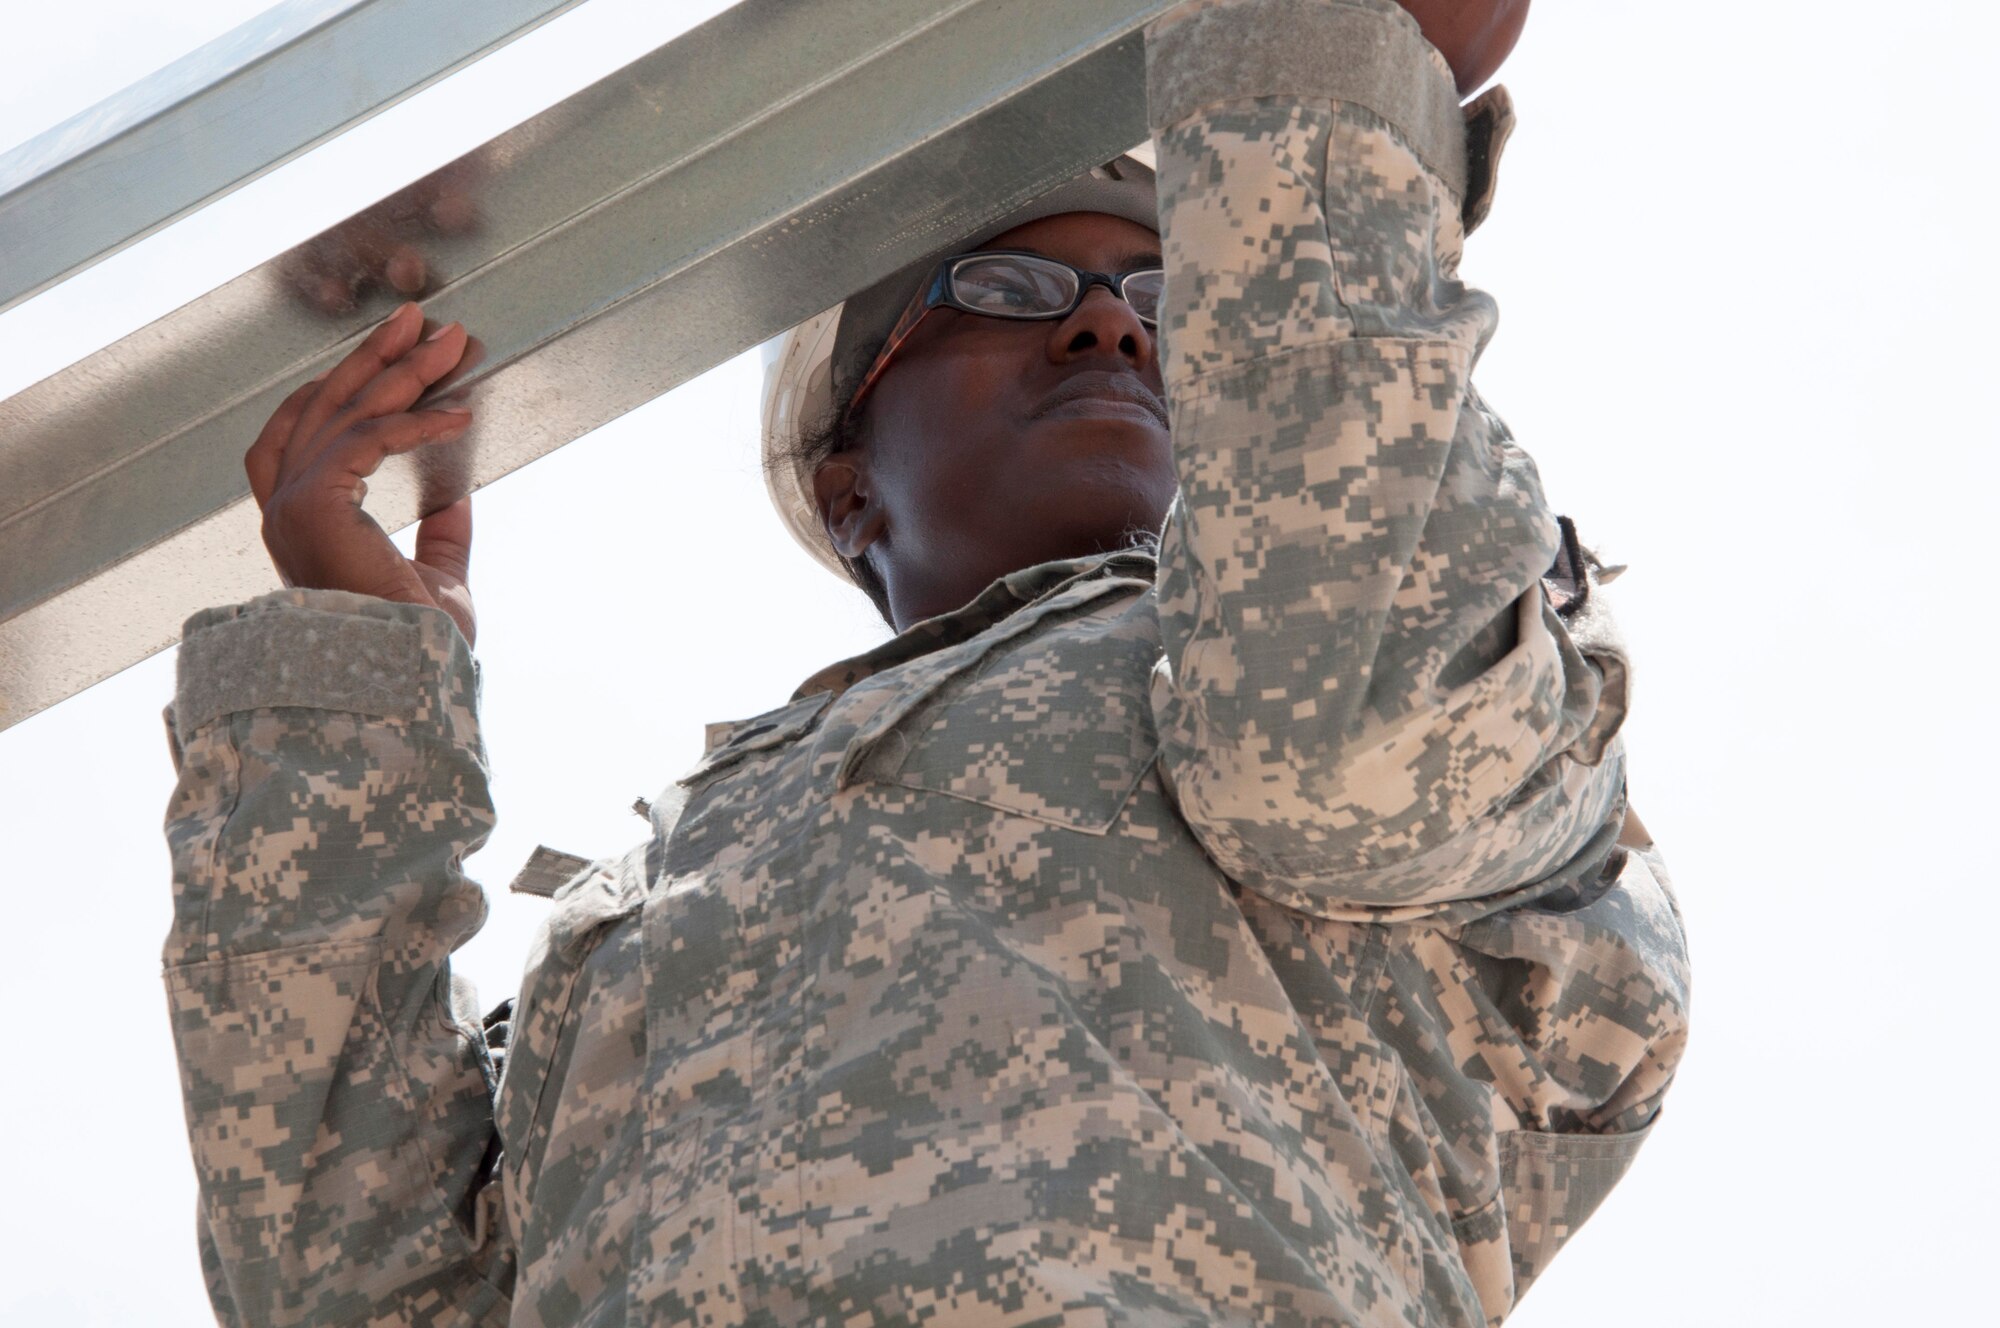 U.S. Army Spc. Jordan Carter, New Horizons electrician from the Louisiana National Guard's 1023rd Vertical Engineer Company, assists with completing the roof on a new preschool building May 13, 2014, at the Hattieville Government School in Hattieville, Belize. BDF and U.S. service members are working together to build five school buildings and one medical facility in Belize during New Horizons Belize 2014. New Horizons is an annual event coordinated between the U.S. and the host nation to provide mutual training opportunities in the fields of health care and civil engineering. (U.S. Air Force photo by Tech. Sgt. Kali L. Gradishar/Released)